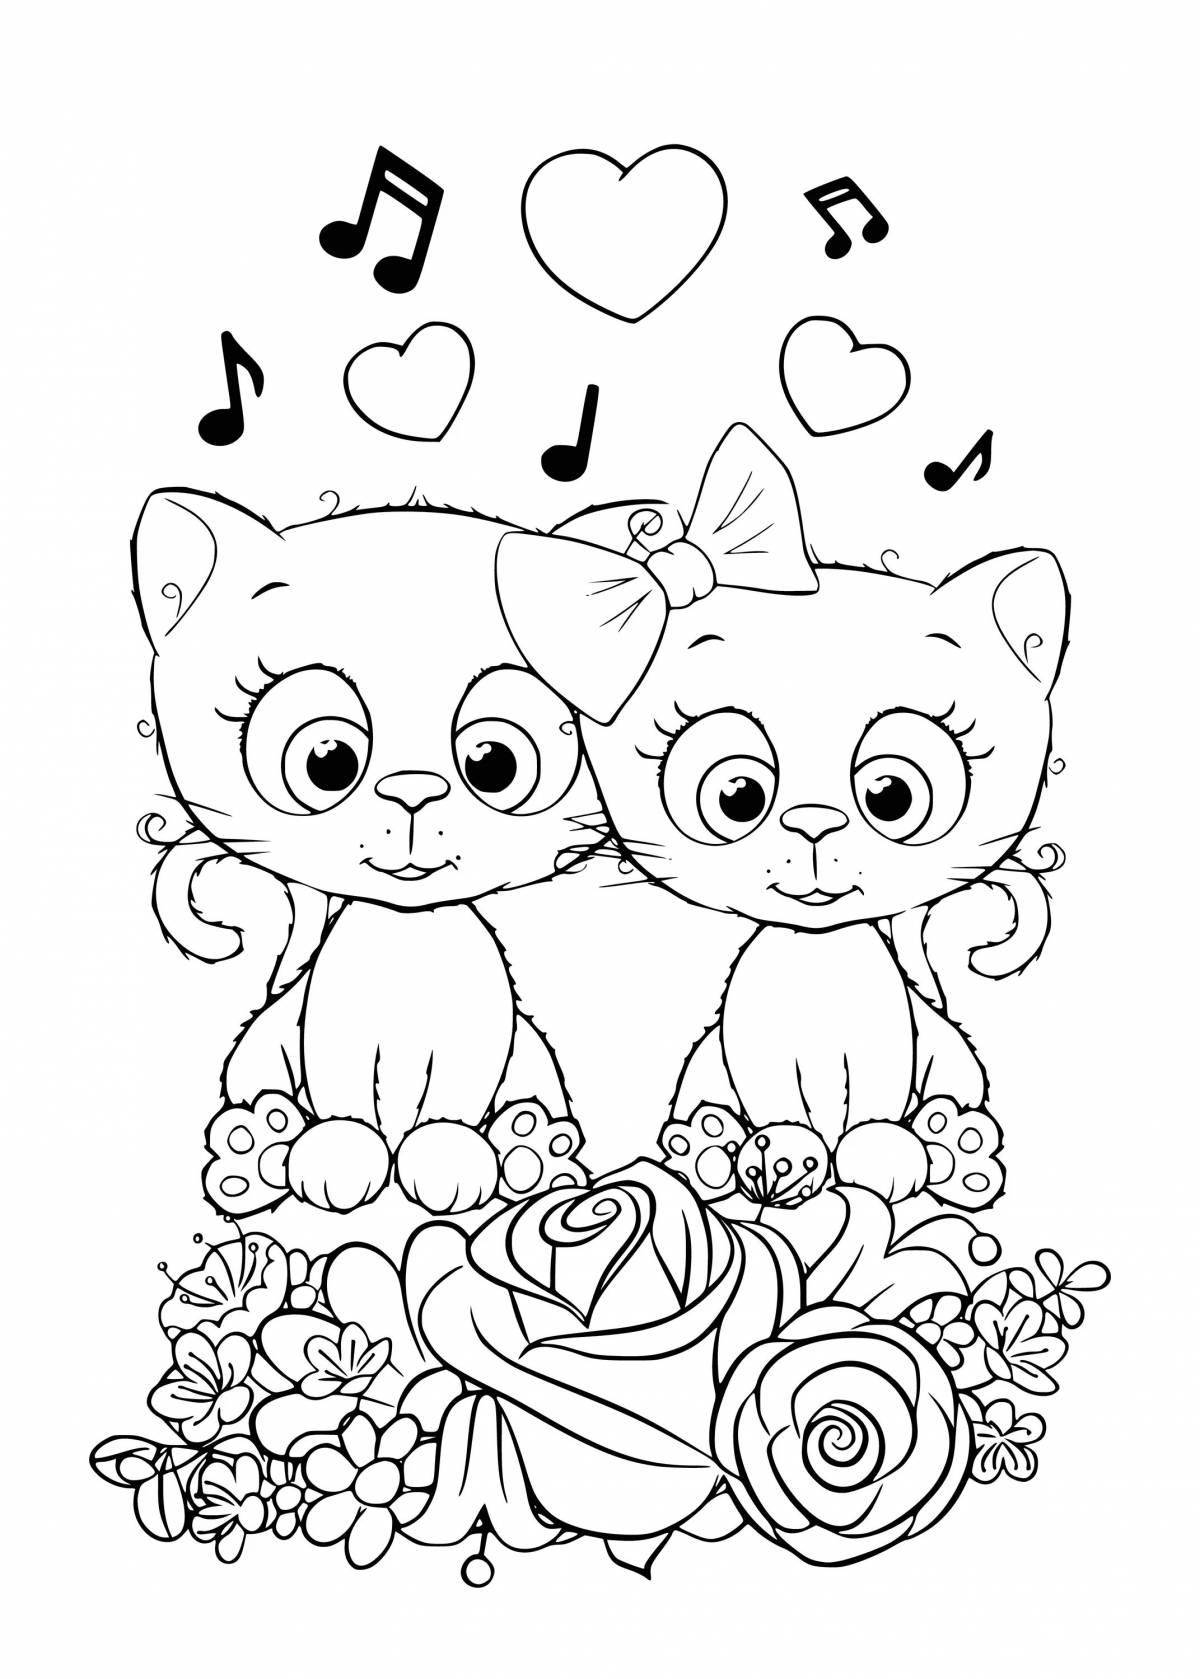 Funny cat with a heart coloring book